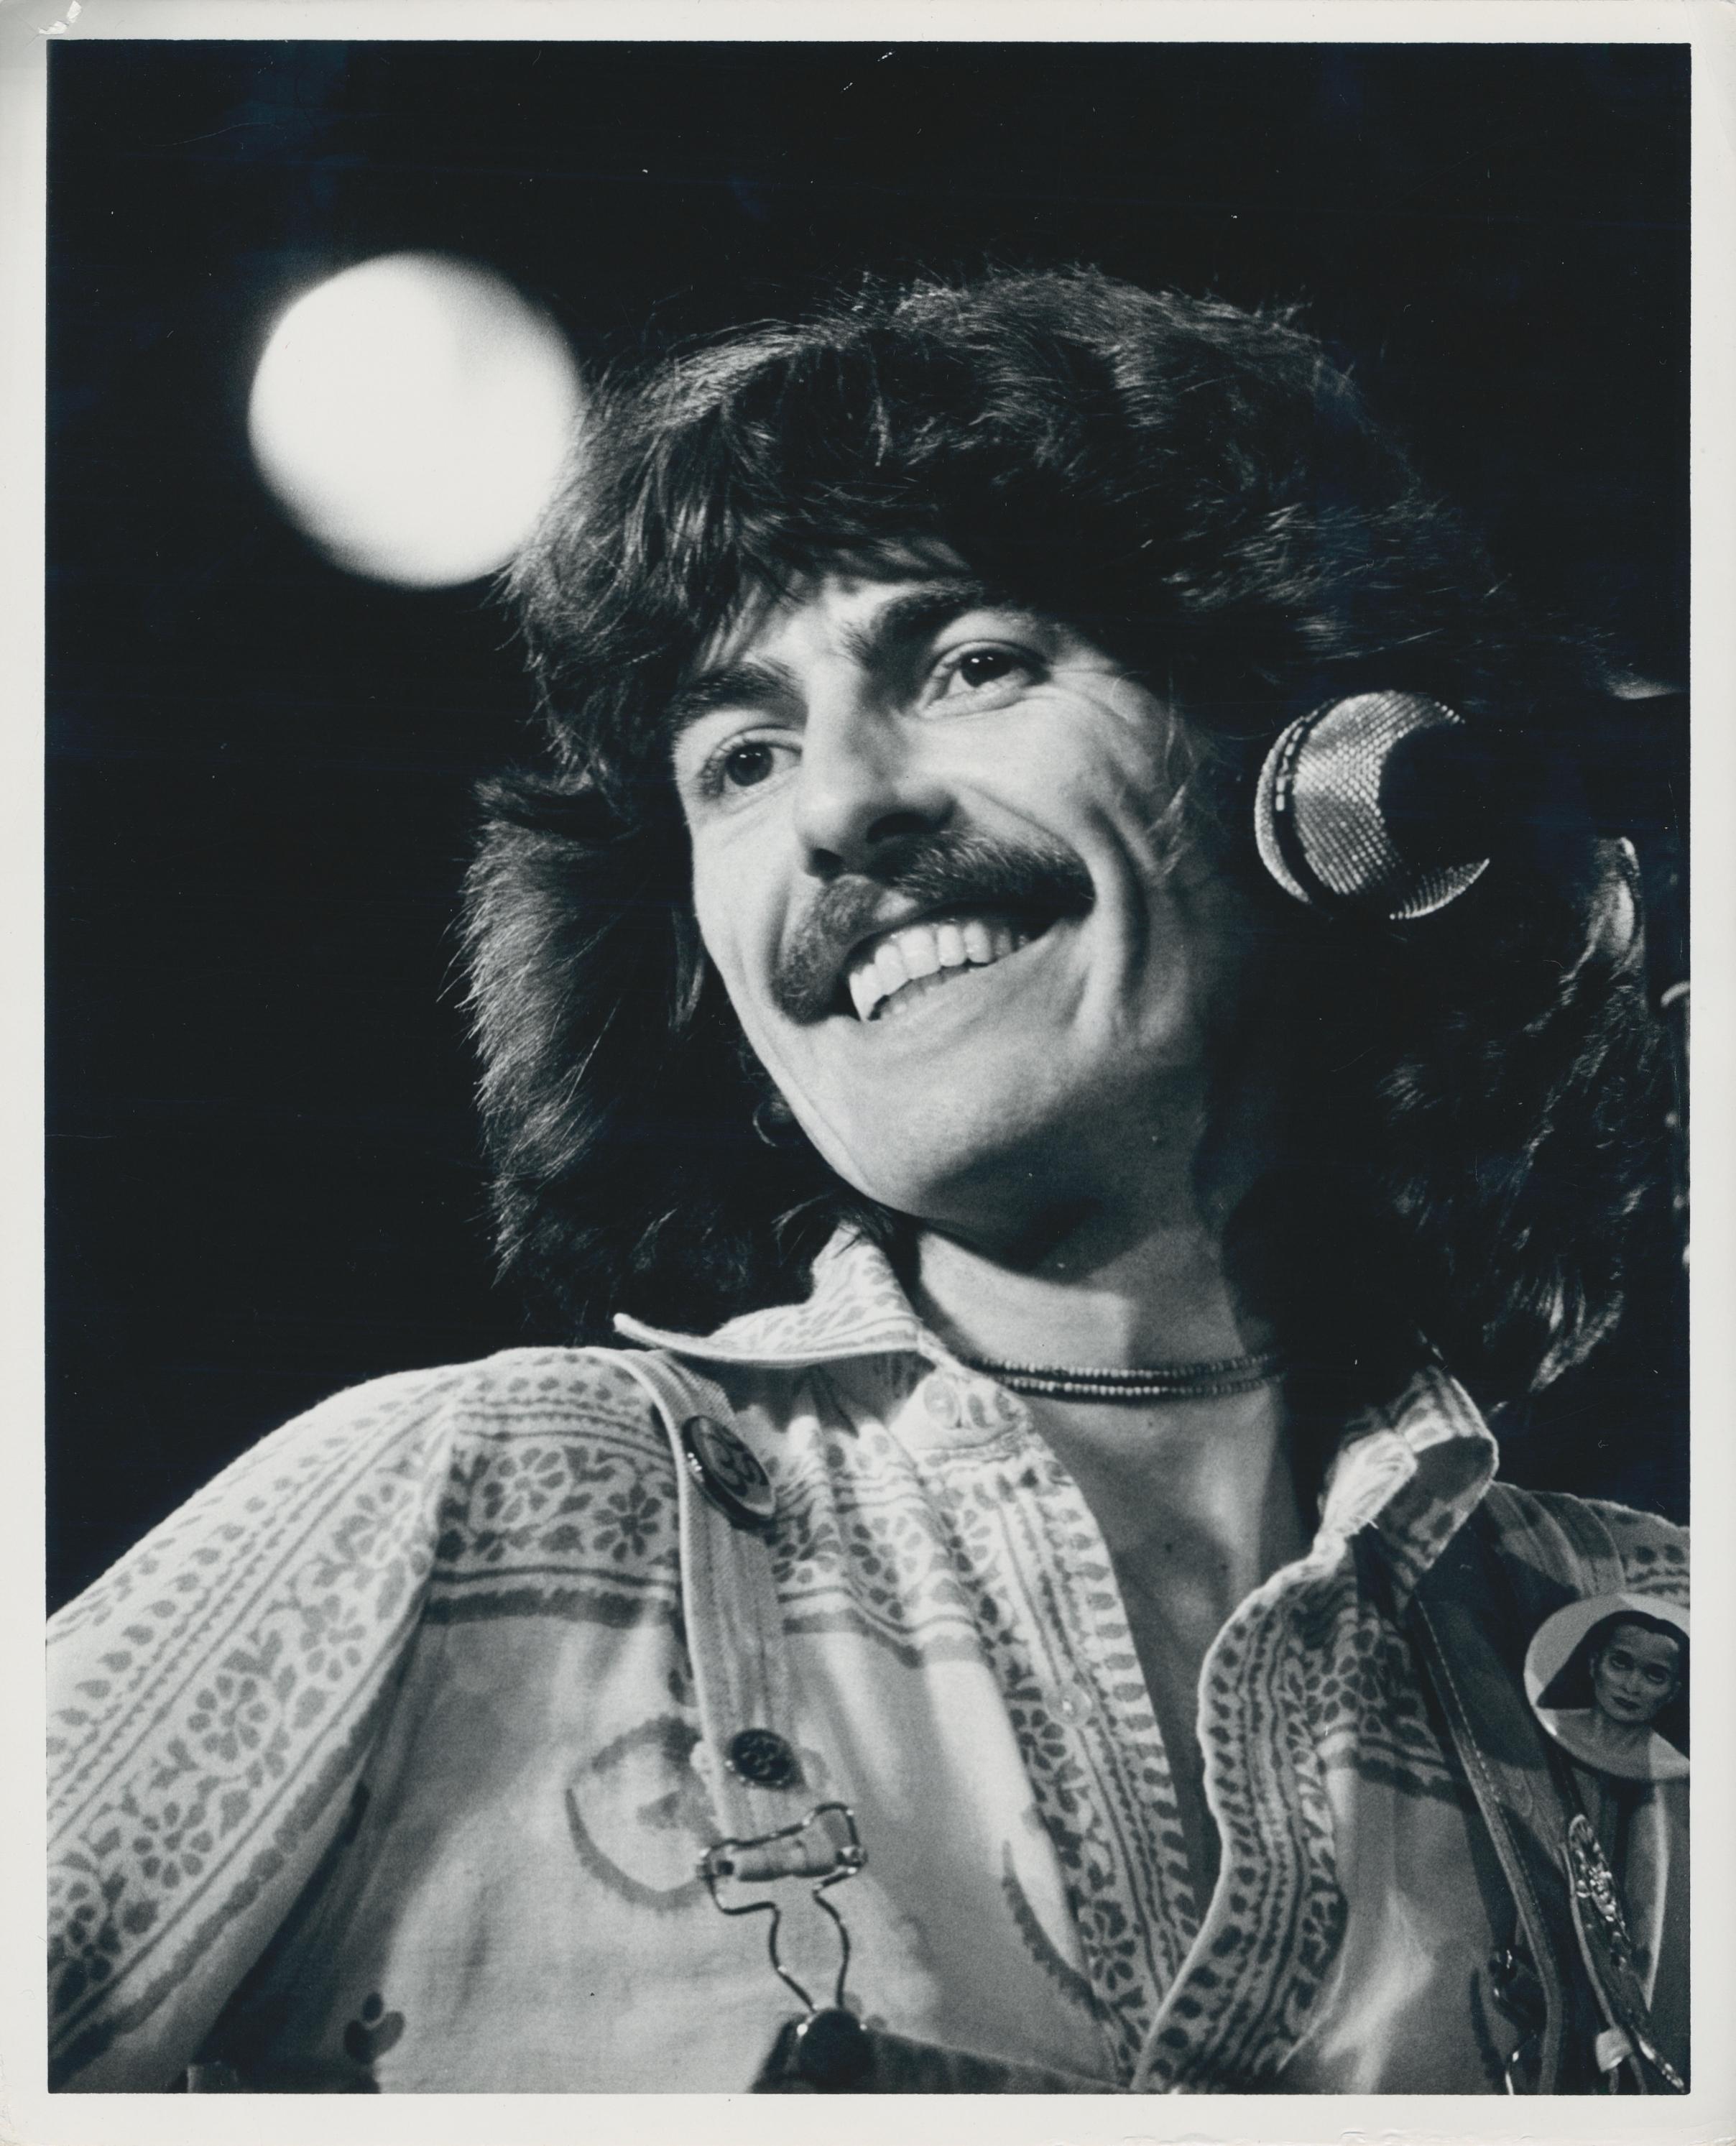 Henry Grossman Portrait Photograph - George Harrison on Stage, Black and White Photography, 25, 3 x 20, 6 cm